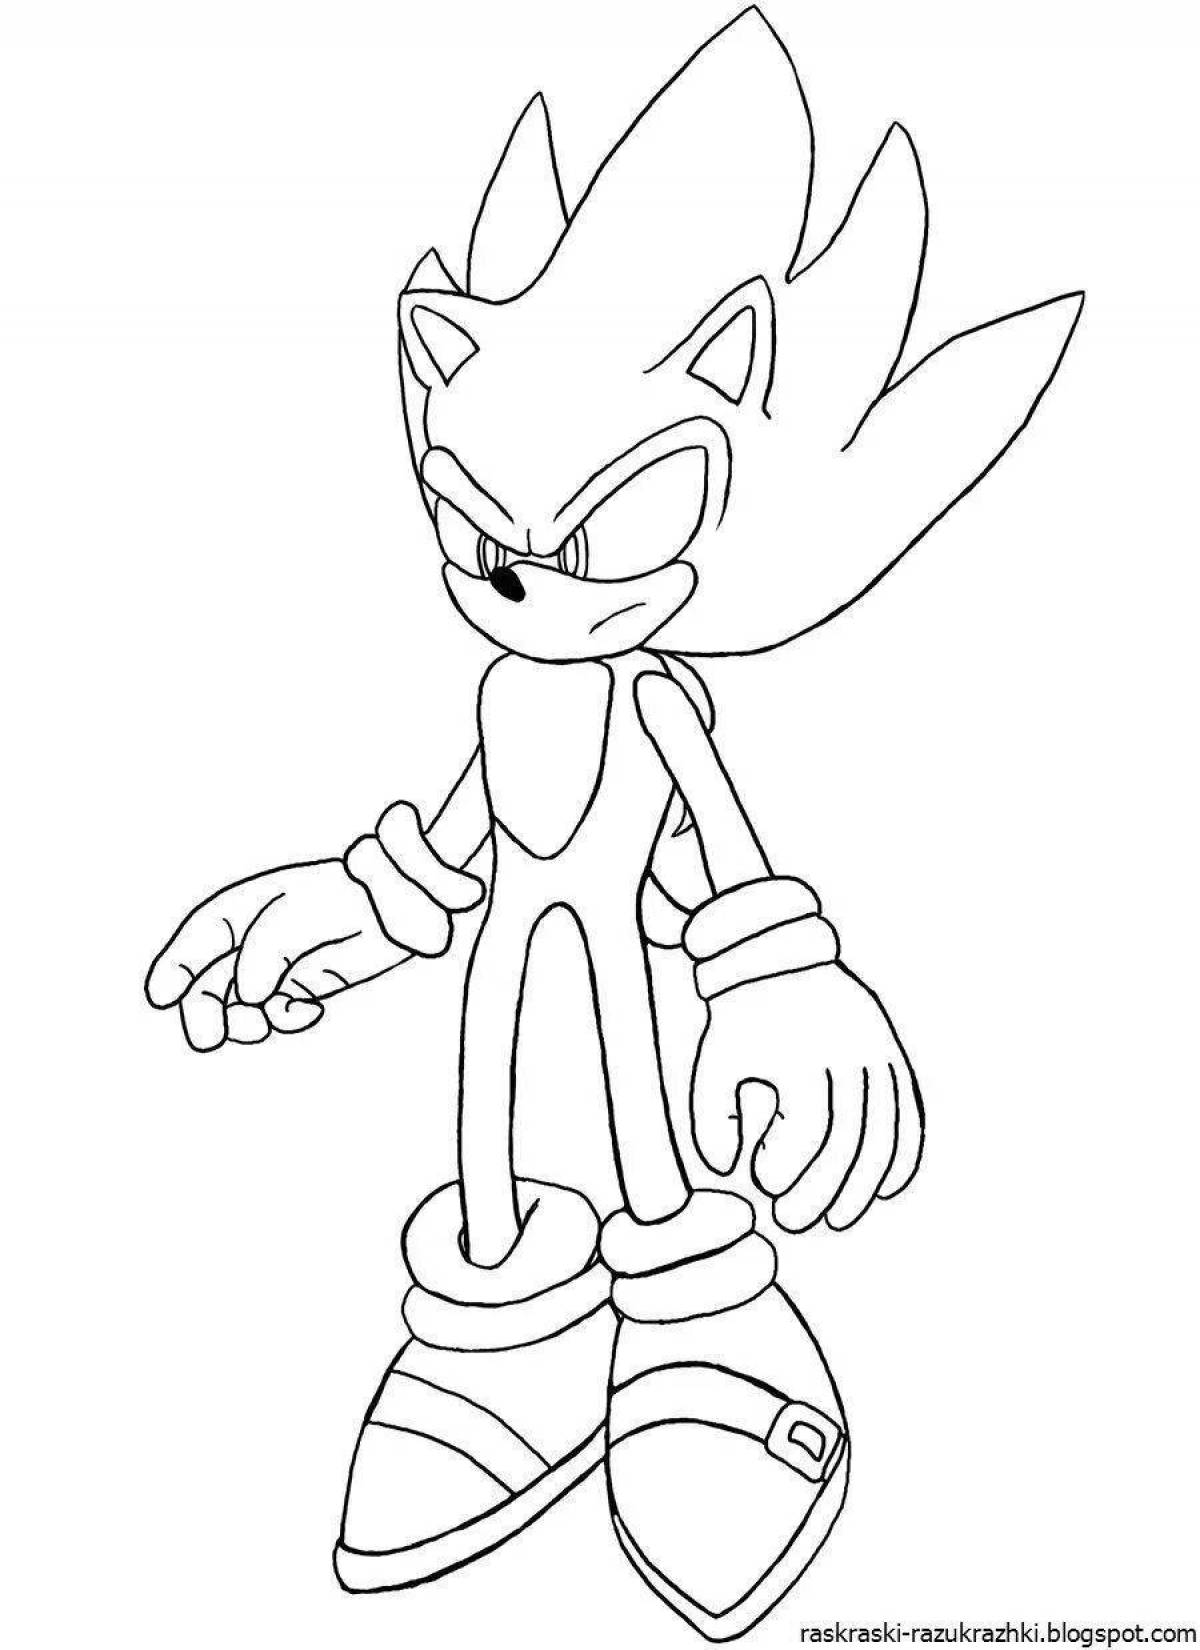 Charming sonic igze coloring book